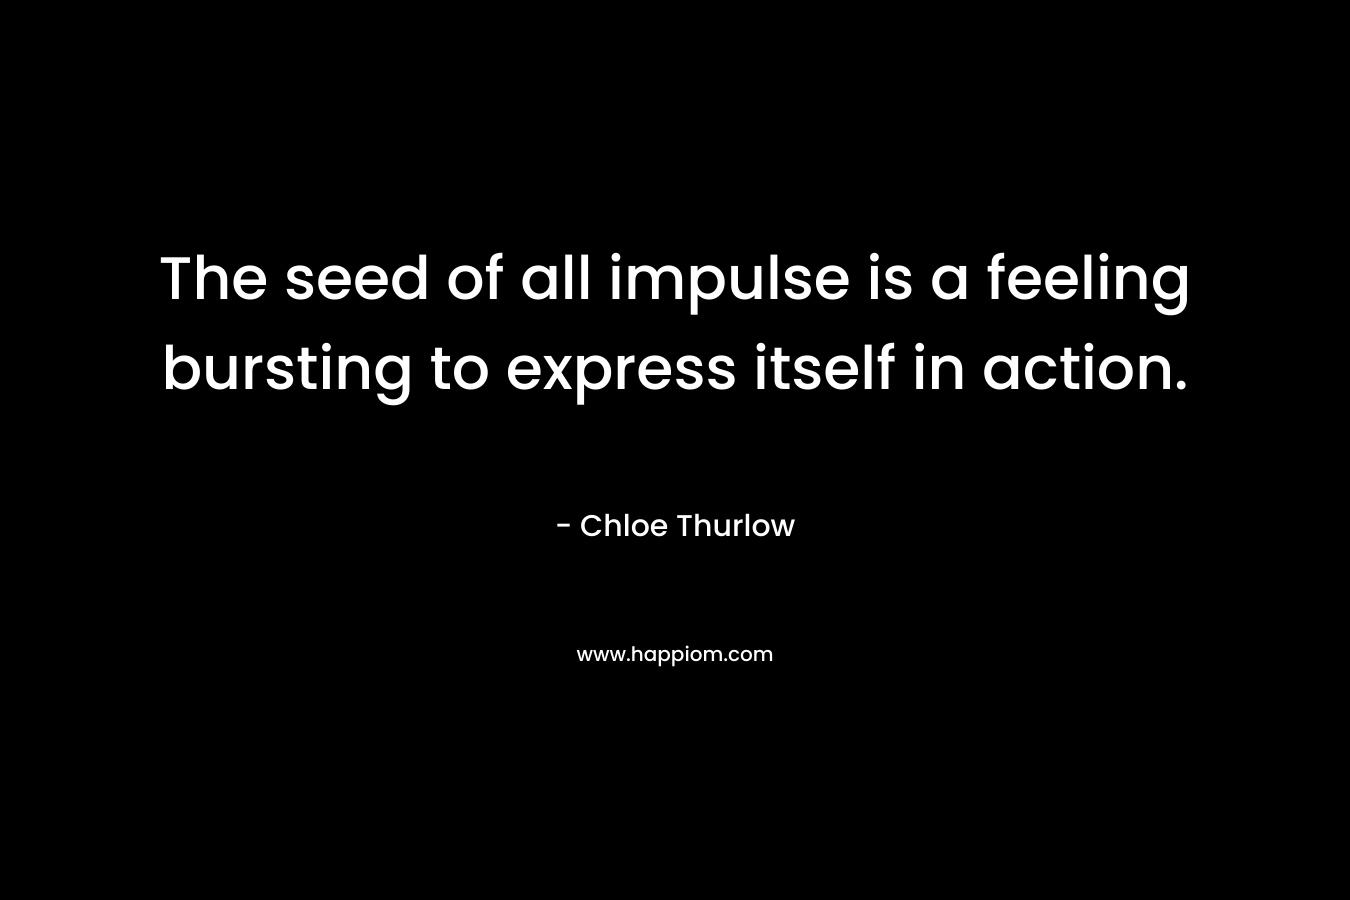 The seed of all impulse is a feeling bursting to express itself in action. – Chloe Thurlow